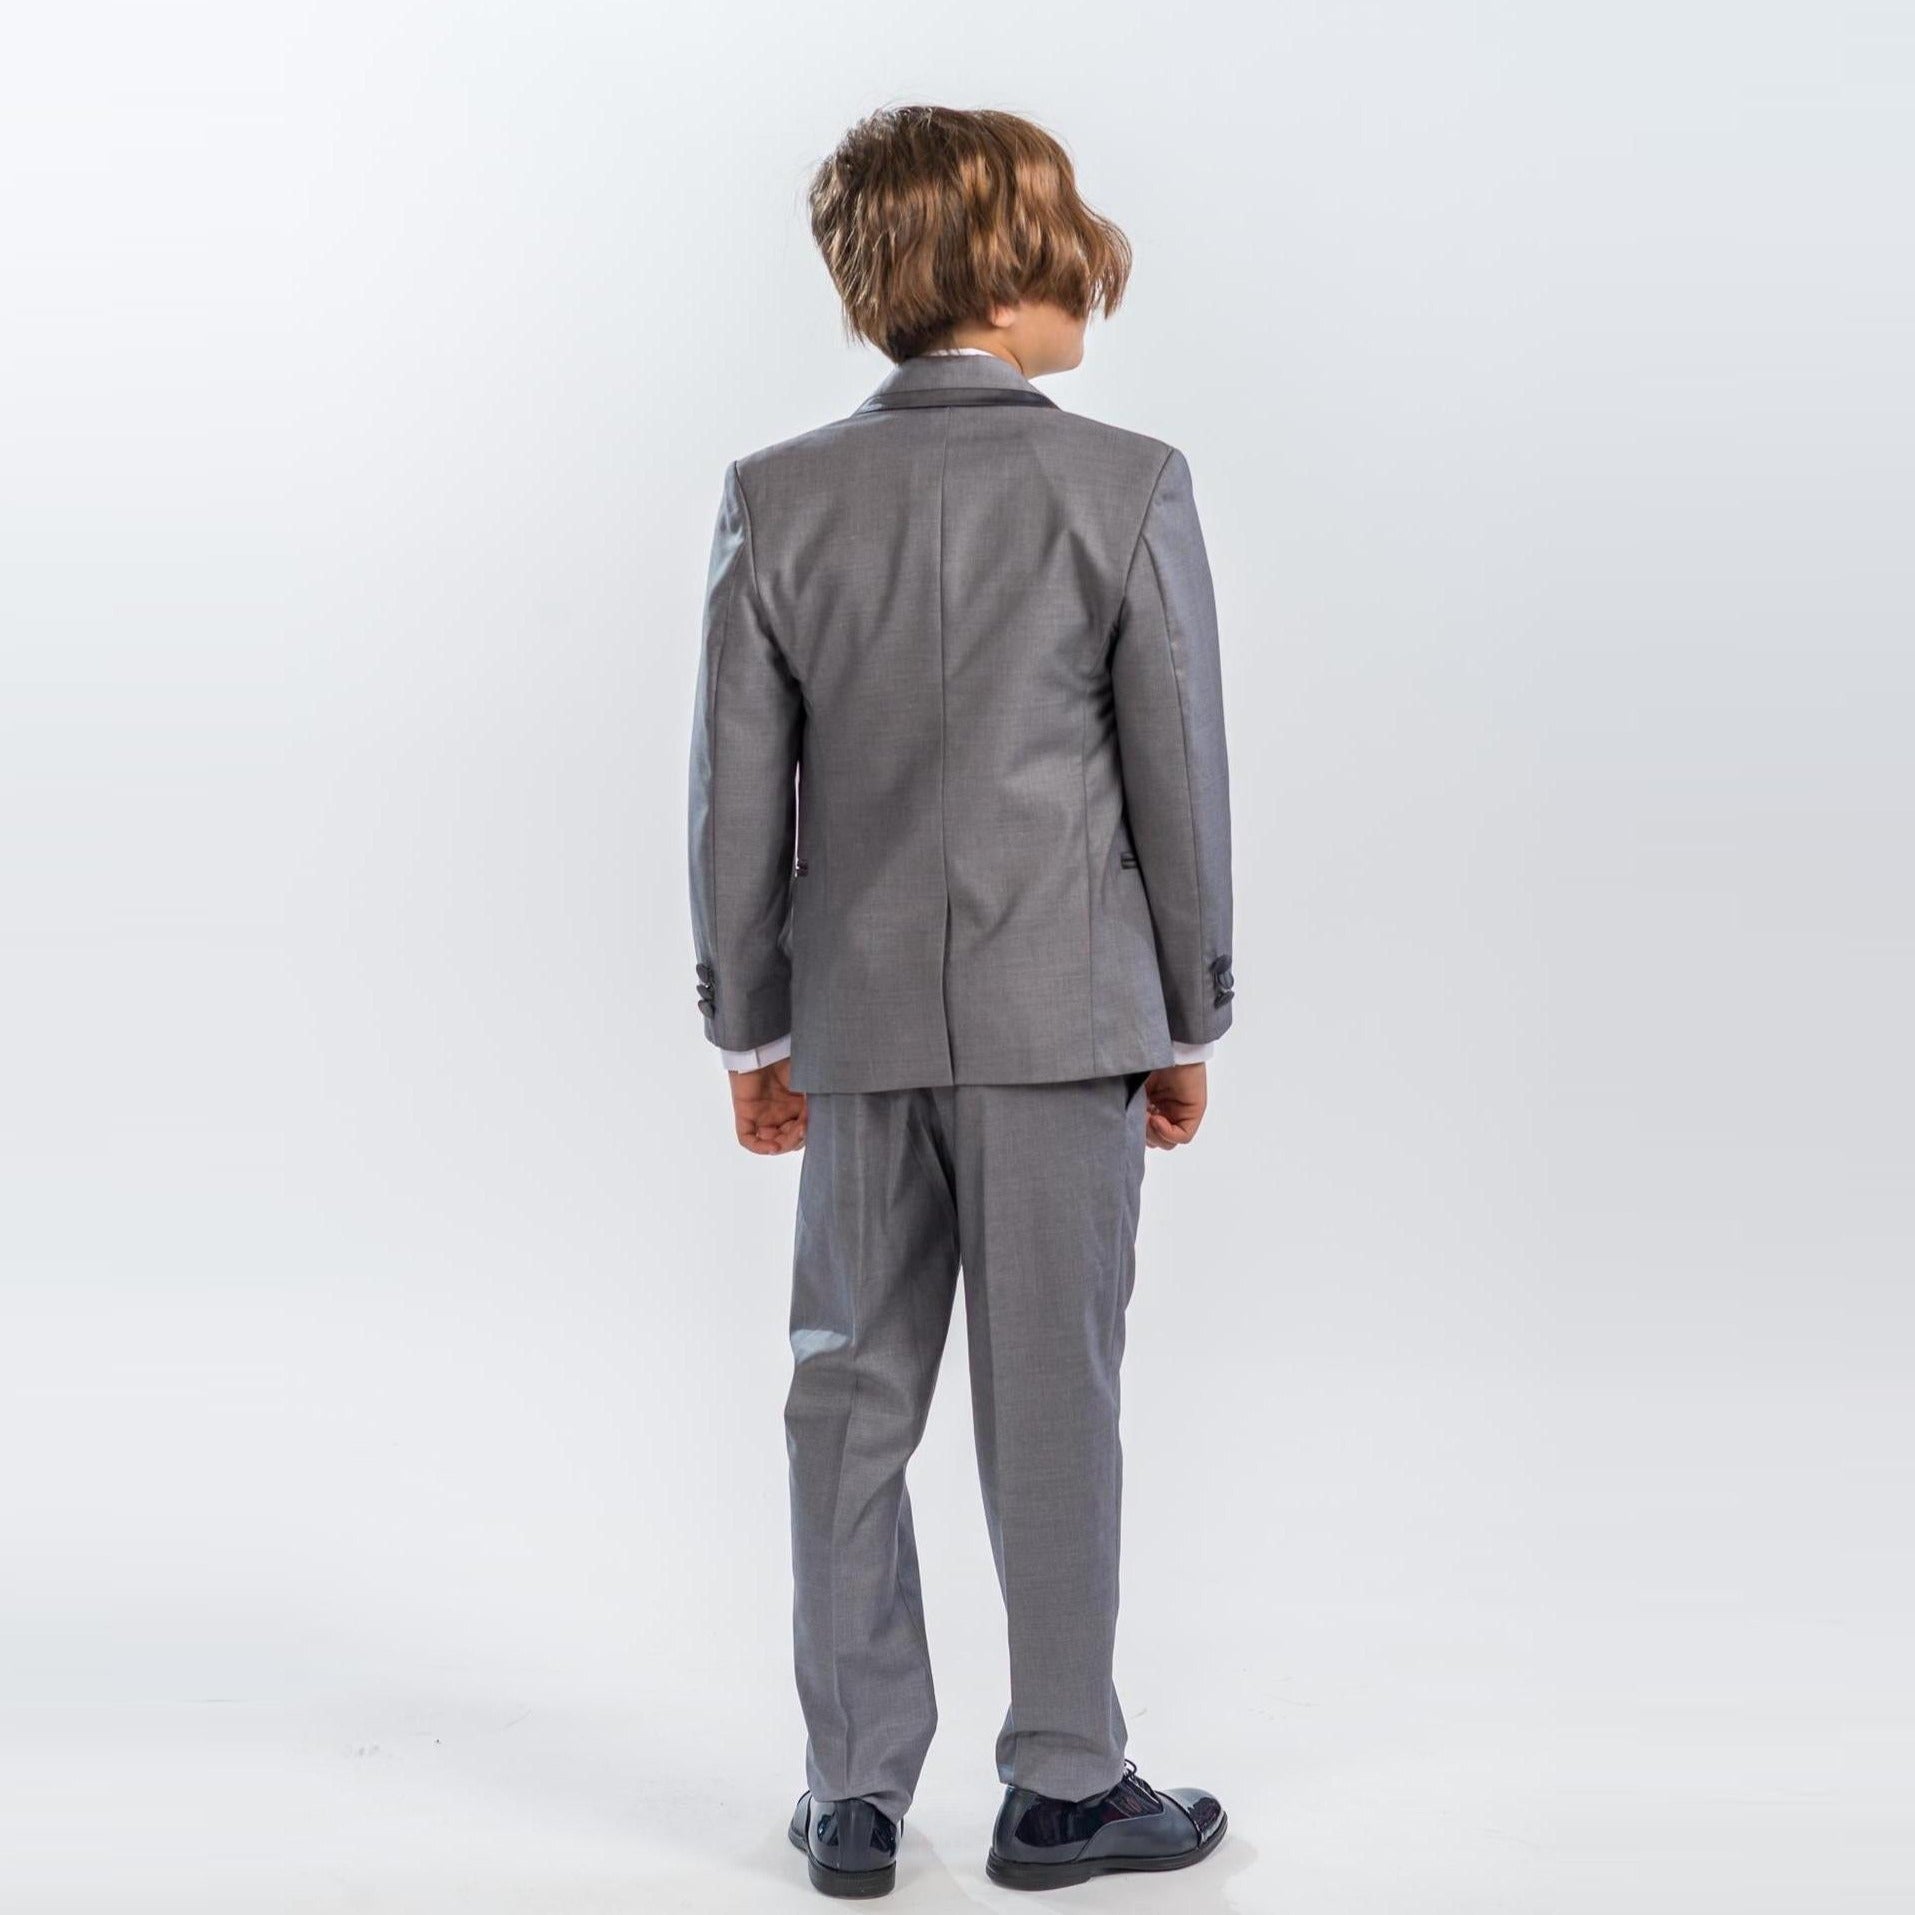 The Noble One Formal Boys Suit